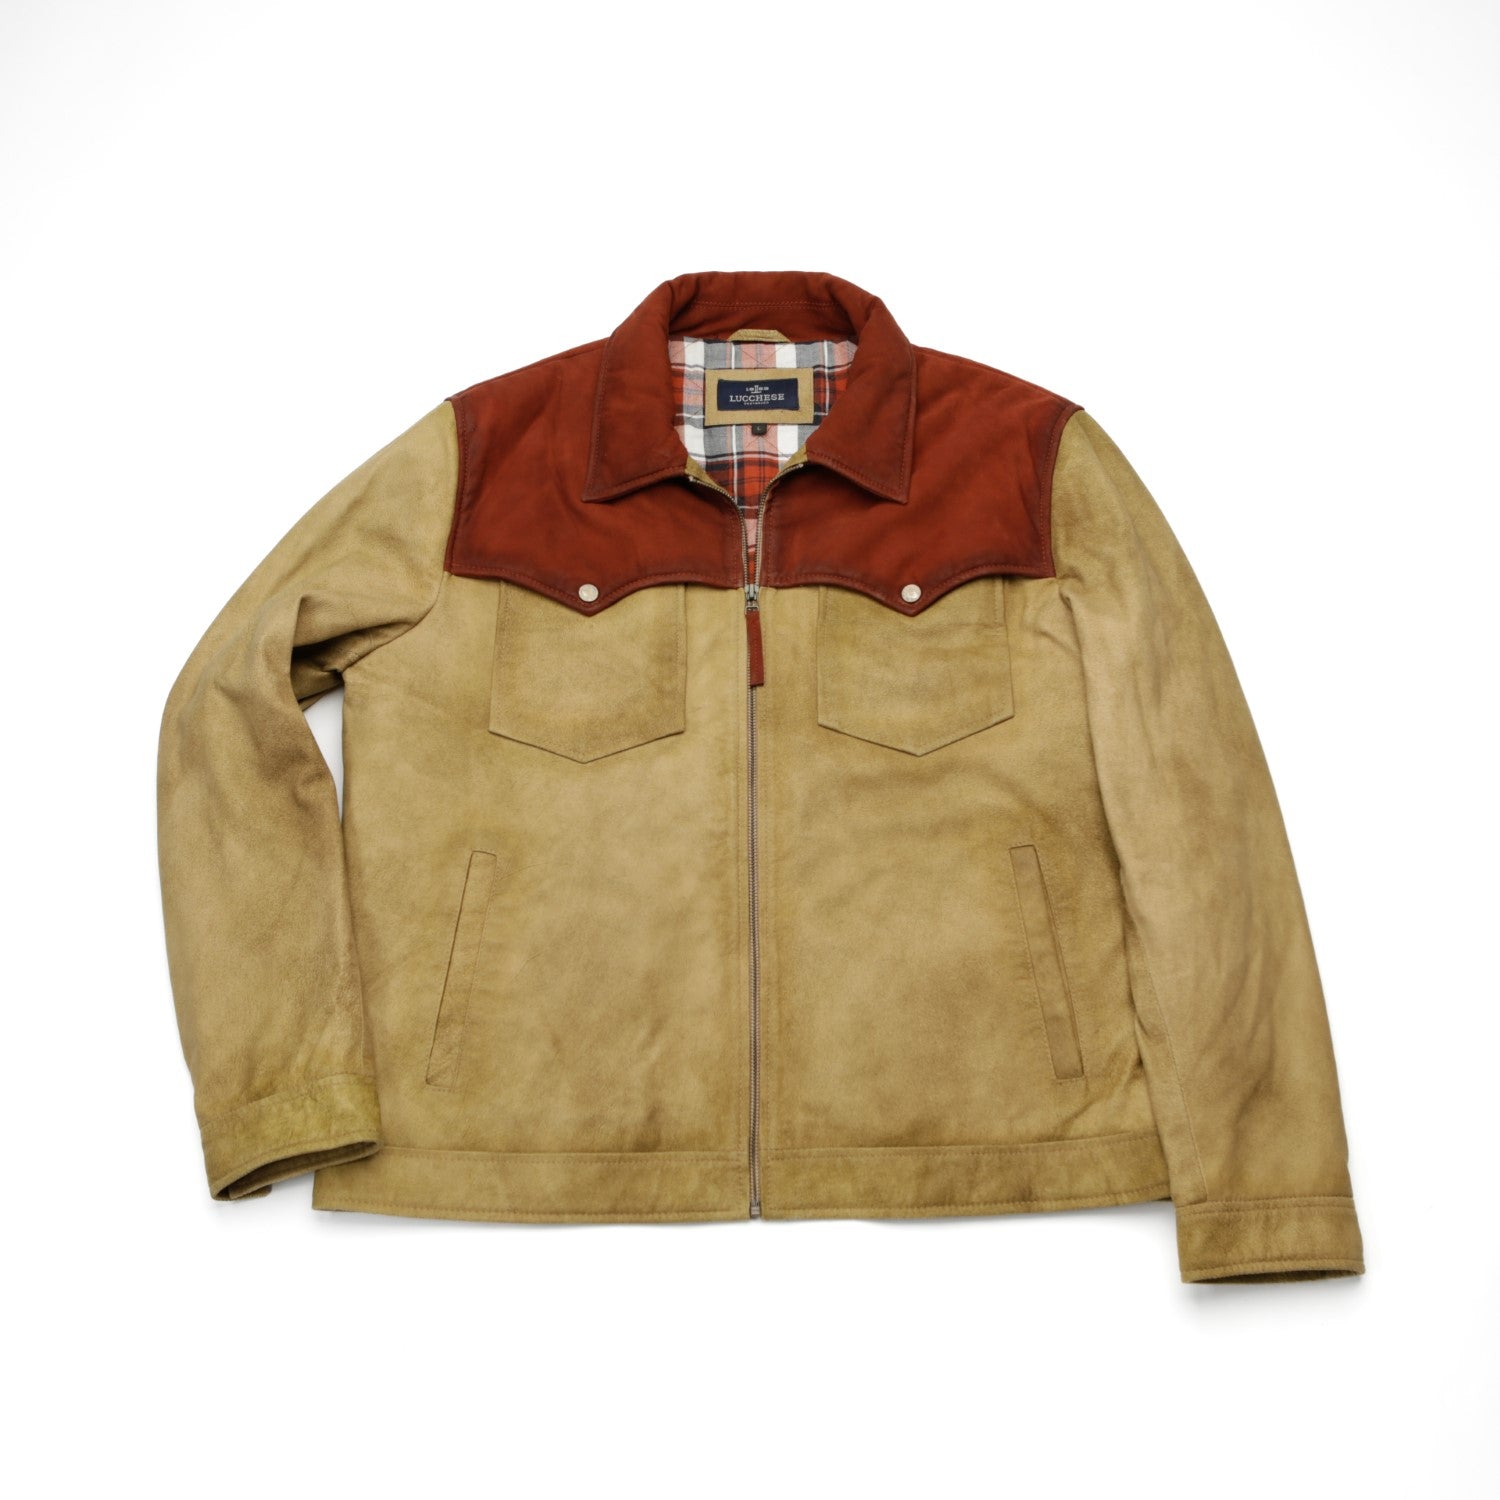 lucchese vintage made in italy jacketジャケット/アウター - レザー ...